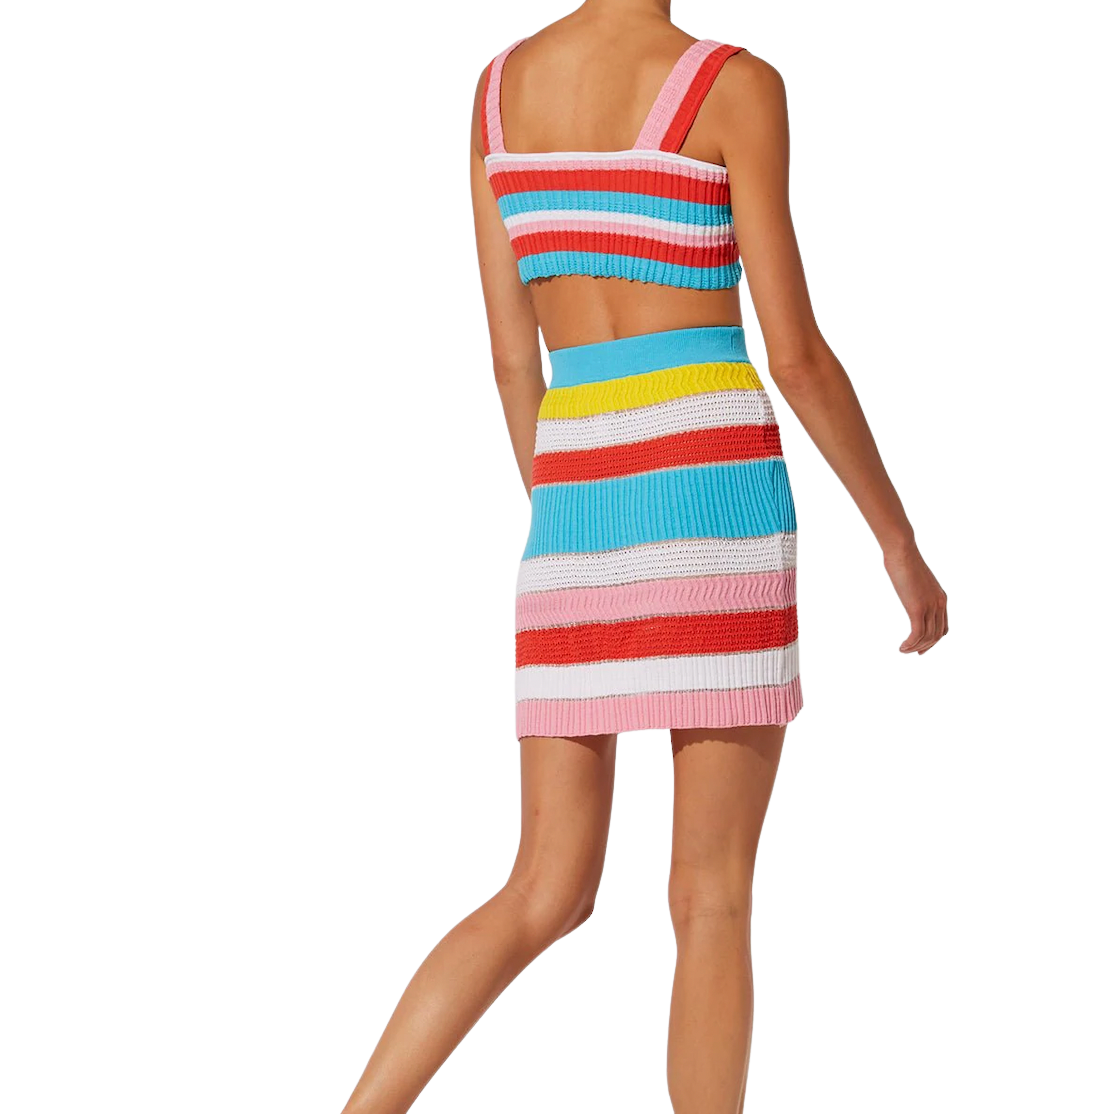 Solid & Striped Emily Top & Rosie Skirt Stripe Colorblock Set